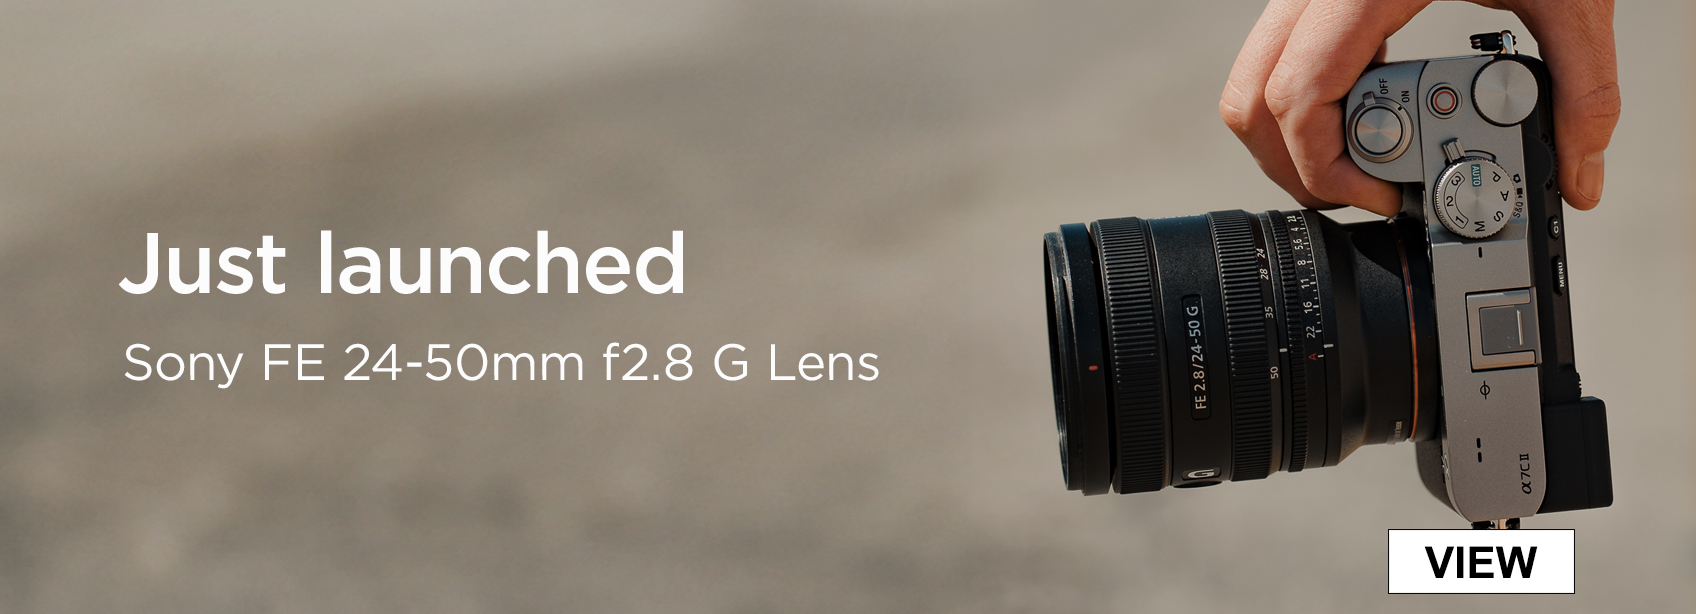 Just launched Sony FE 24-50mm f2.8 G Lens